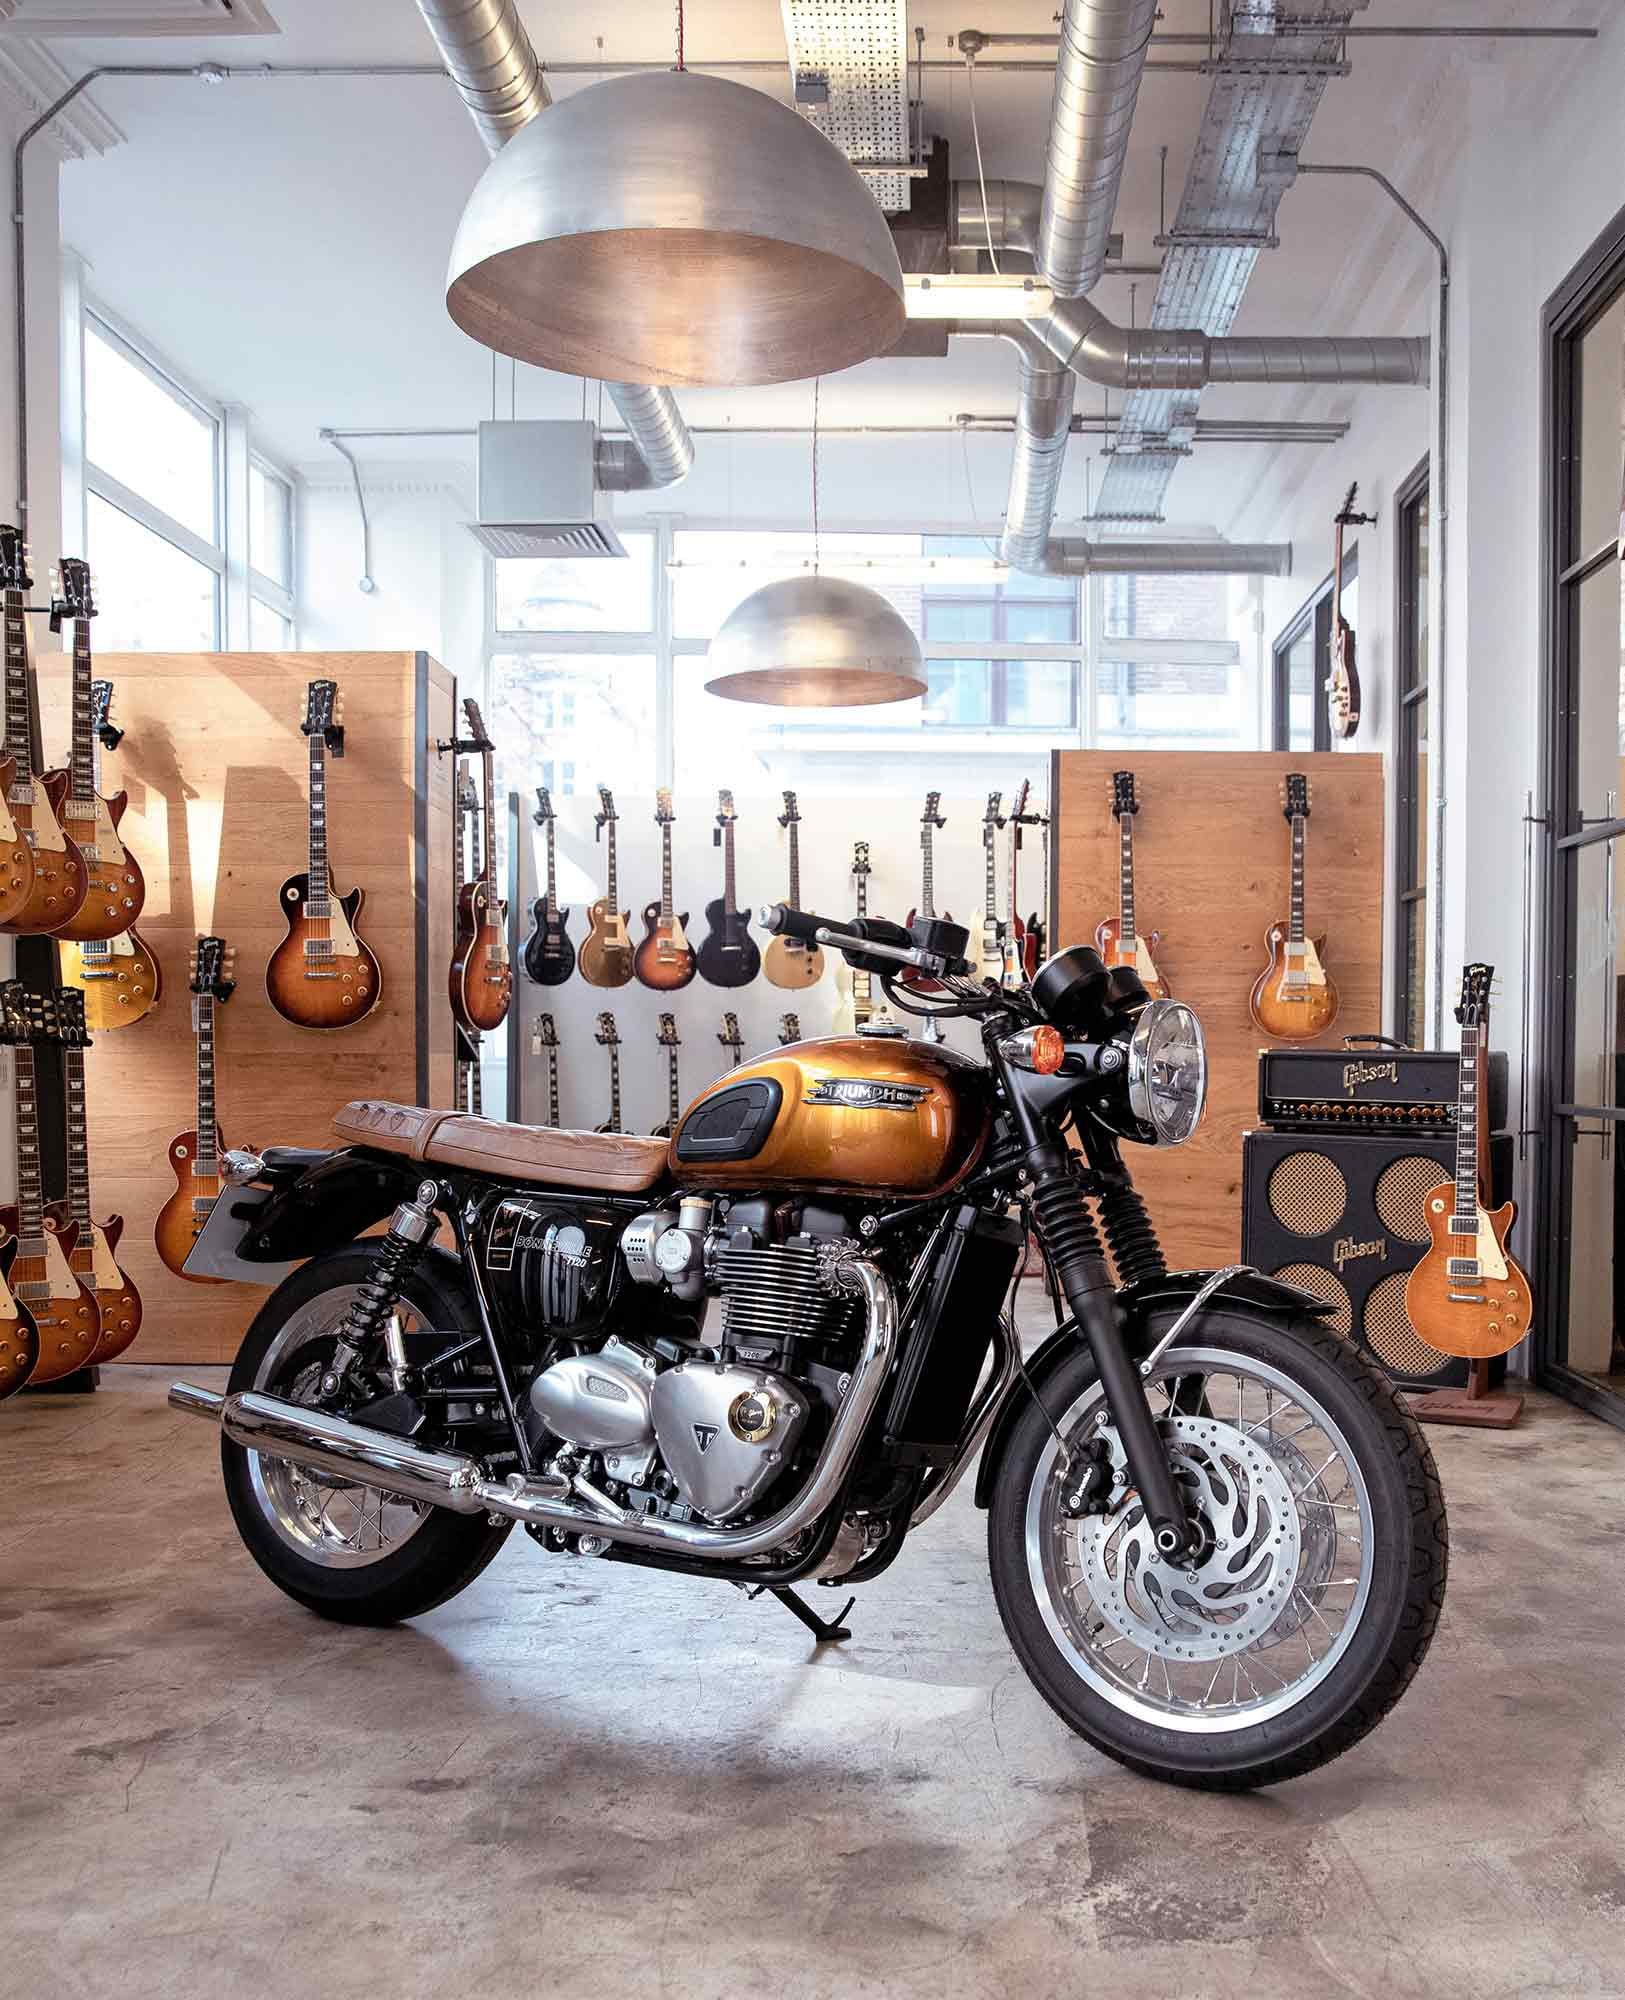 The new guitar and motorcycle are based on legendary classics—the 1959 Gibson Les Paul Standard and the 1959 Triumph Bonneville T120—that are both still sold today.